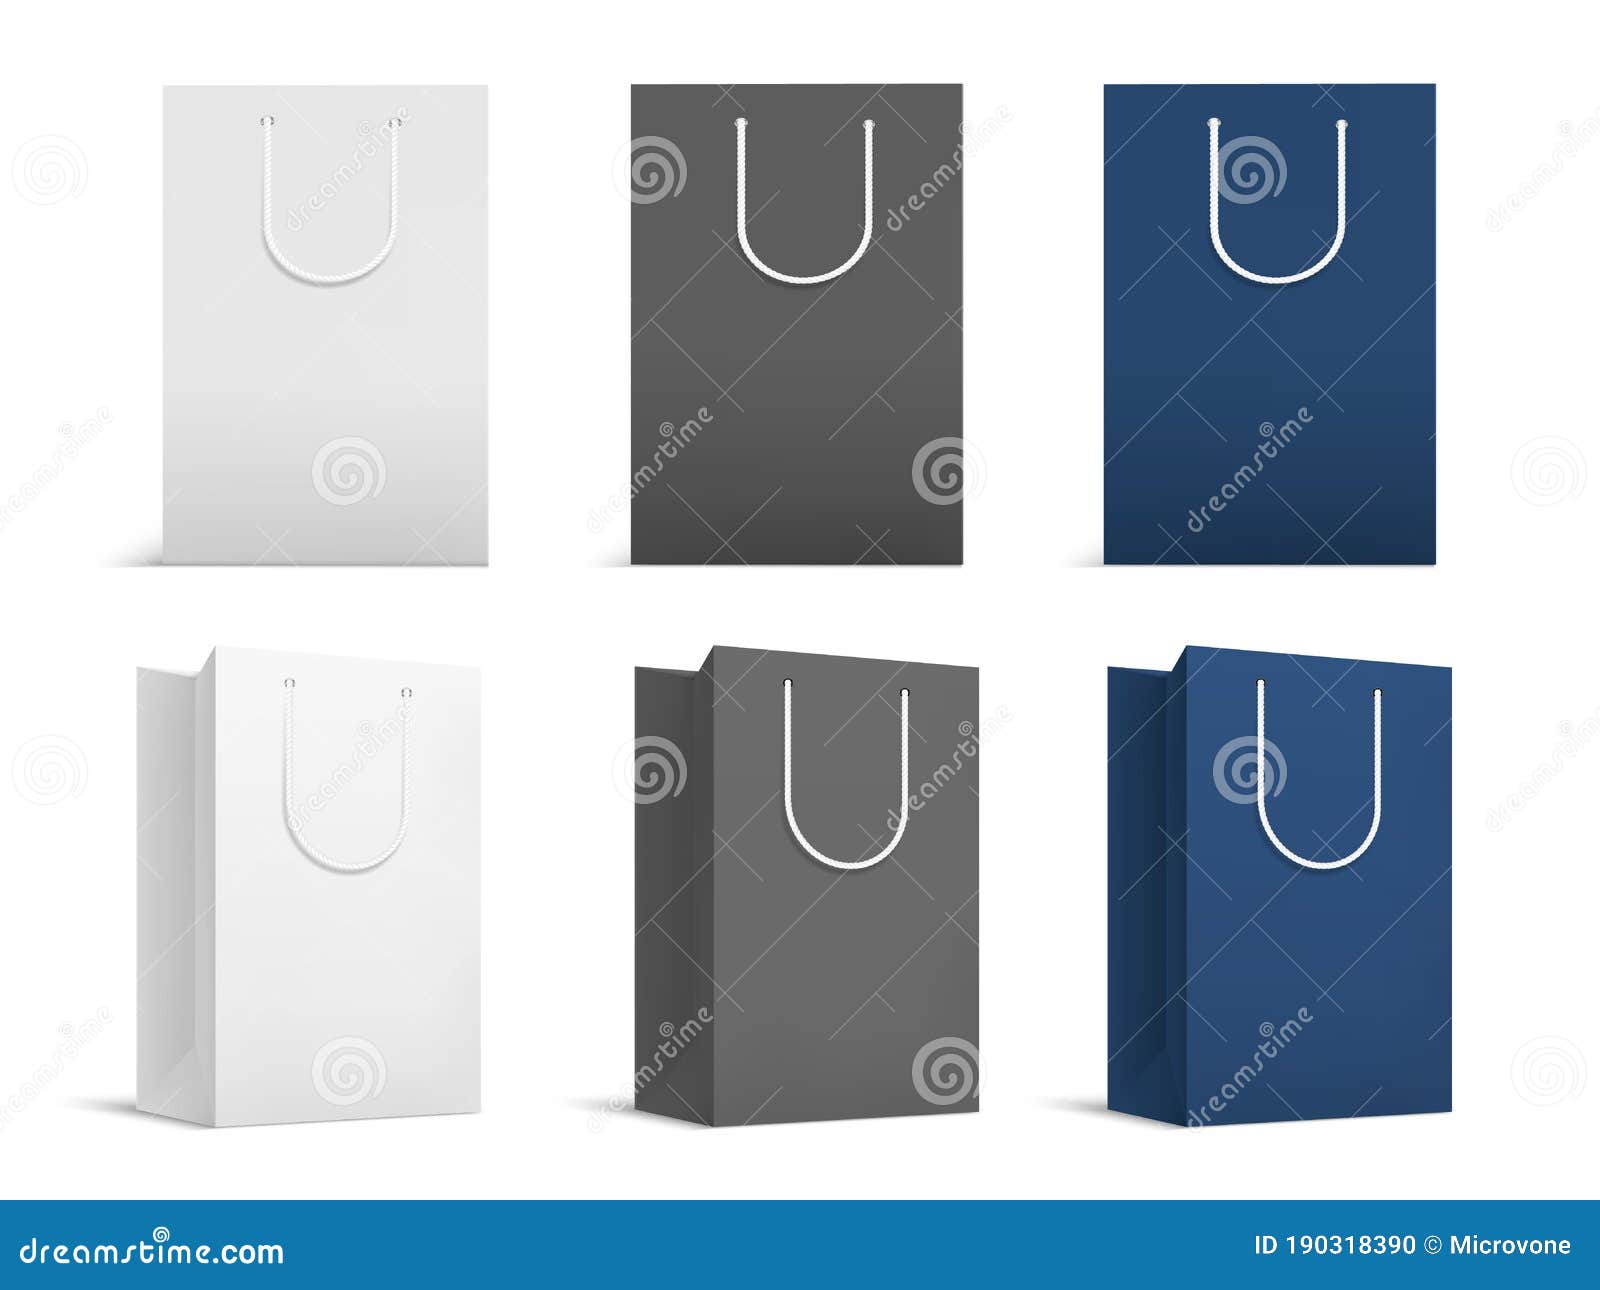 Download Realistic Shopping Bags Mockup. White Black Paper Packs ...